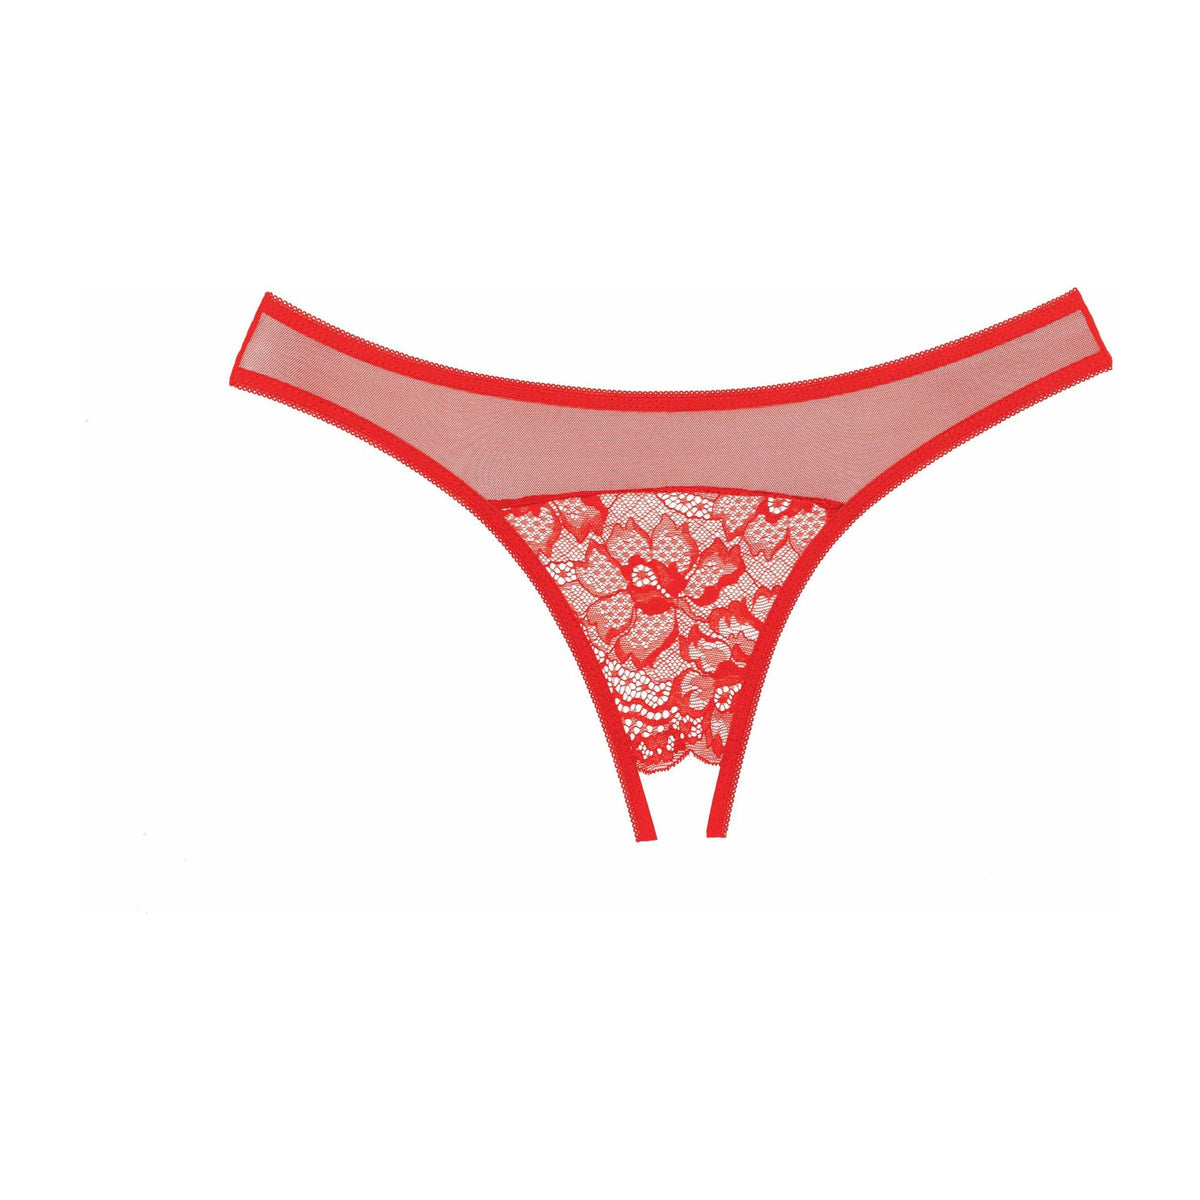 Allure Adore – Just a Rumour Panty – Red – One Size